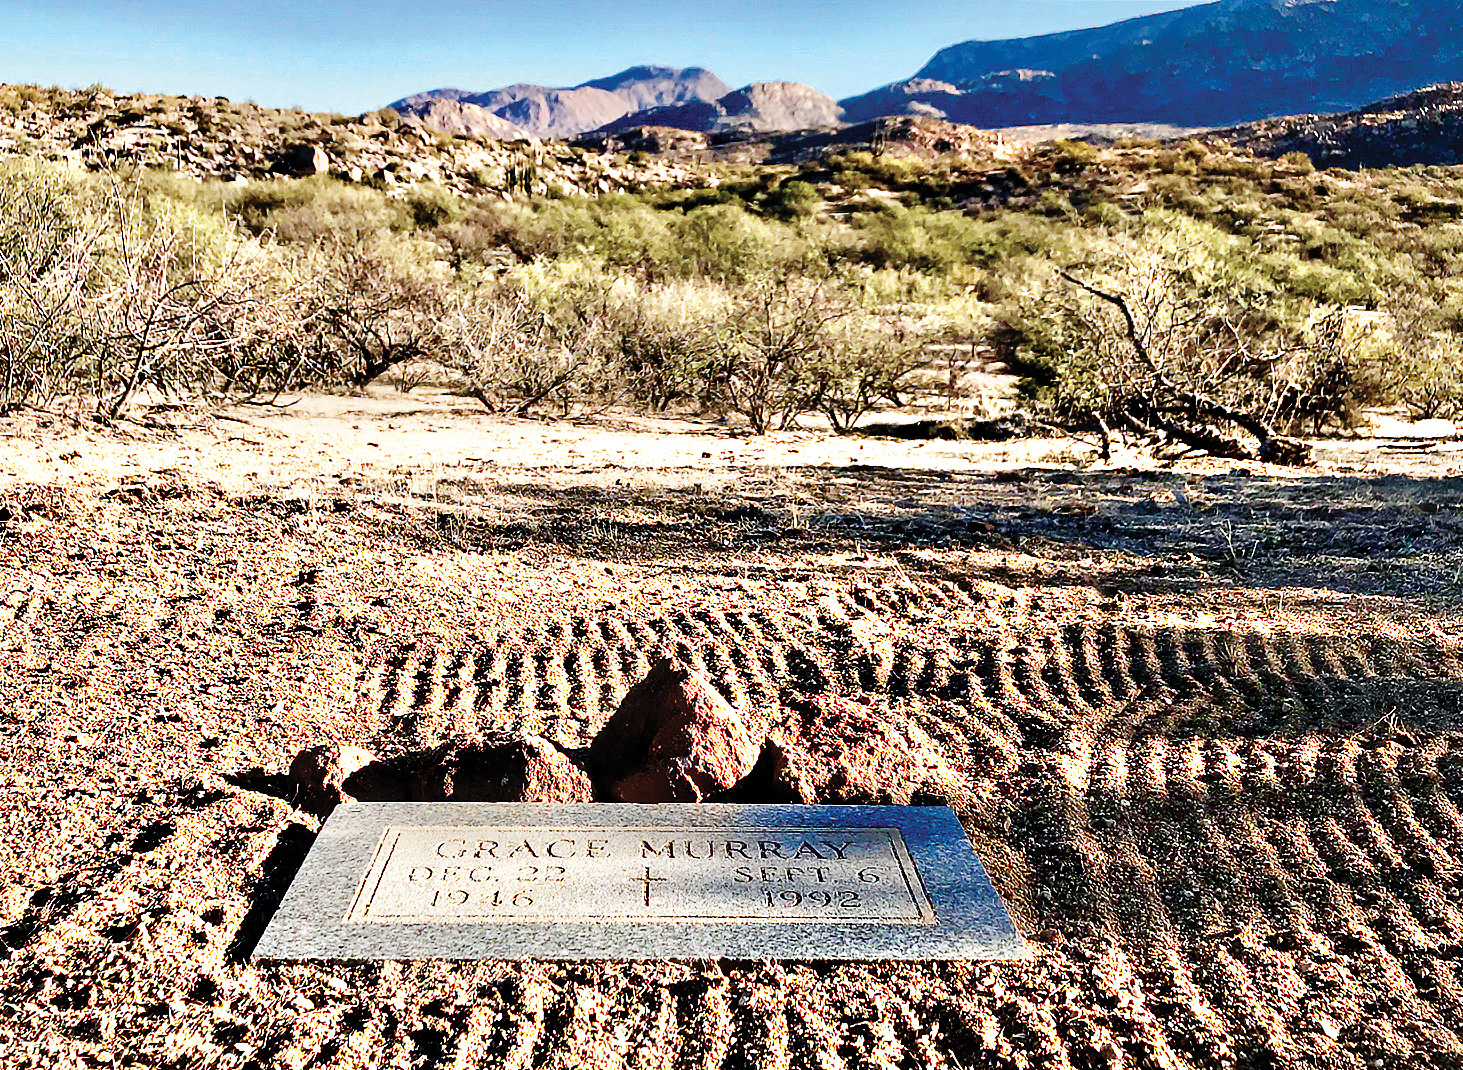 Gravestone of Grace Murray rests in the Catalinas (Photo by Elisabeth Wheeler)